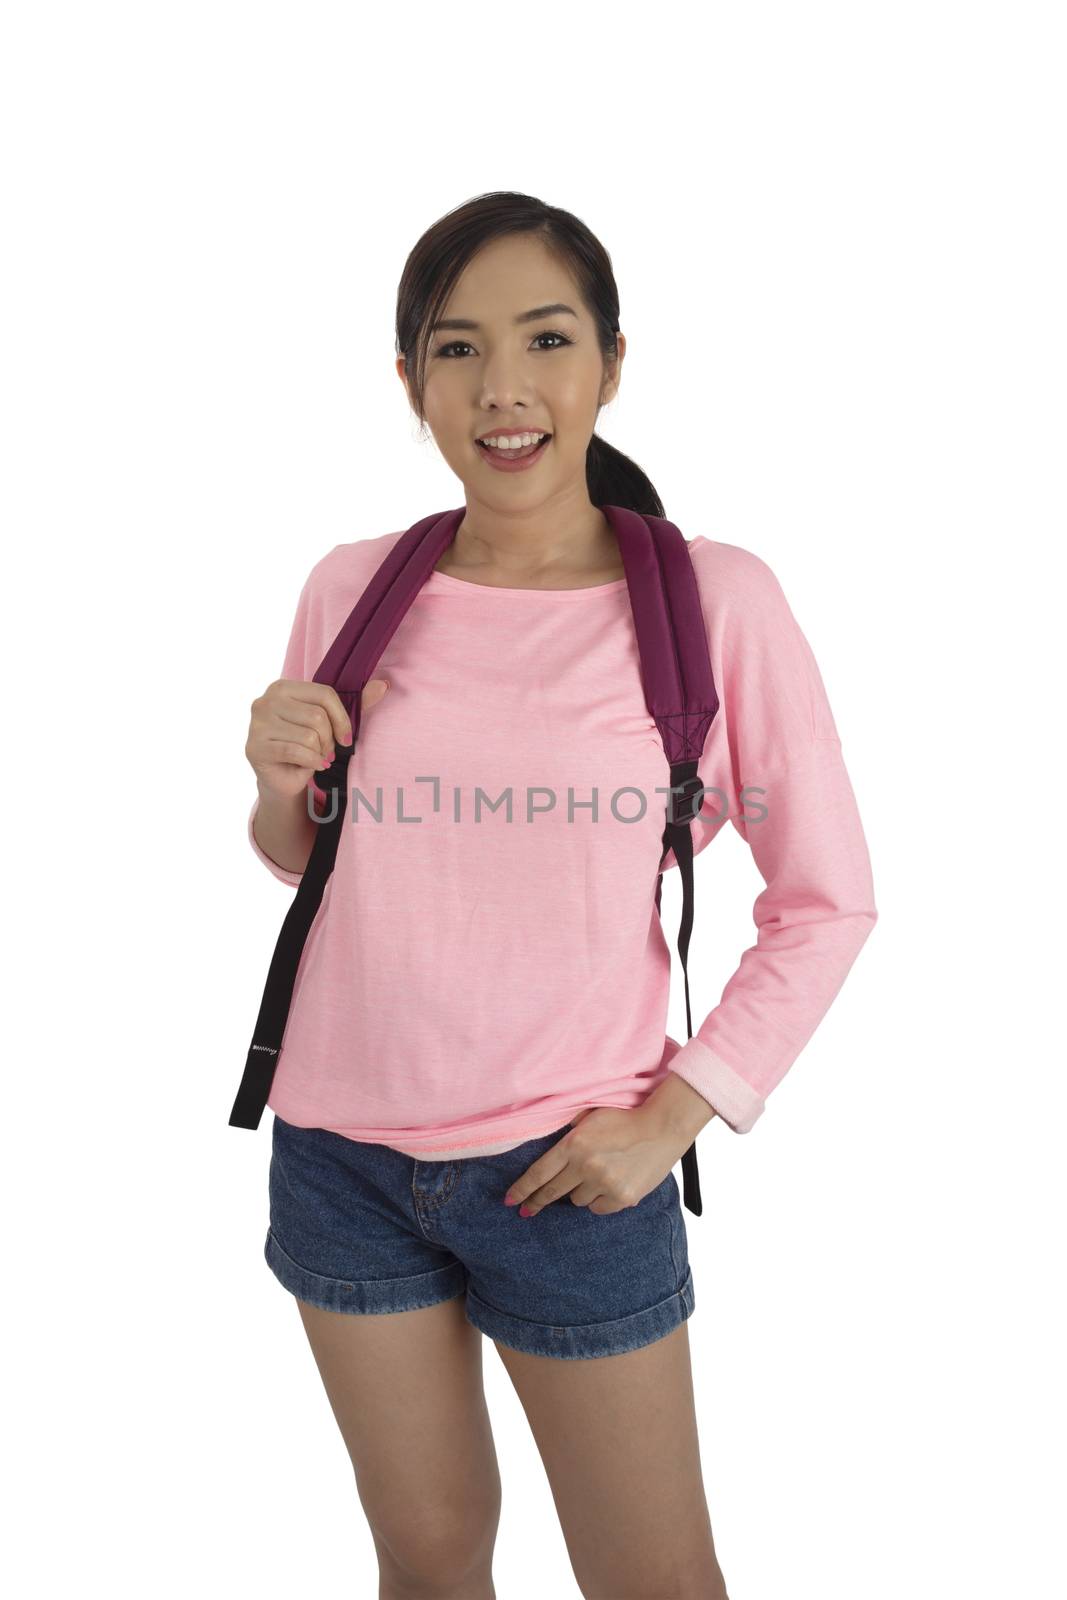 Asian girl in pink t-shirt and blue jean shorts with backpack. by pandpstock_002